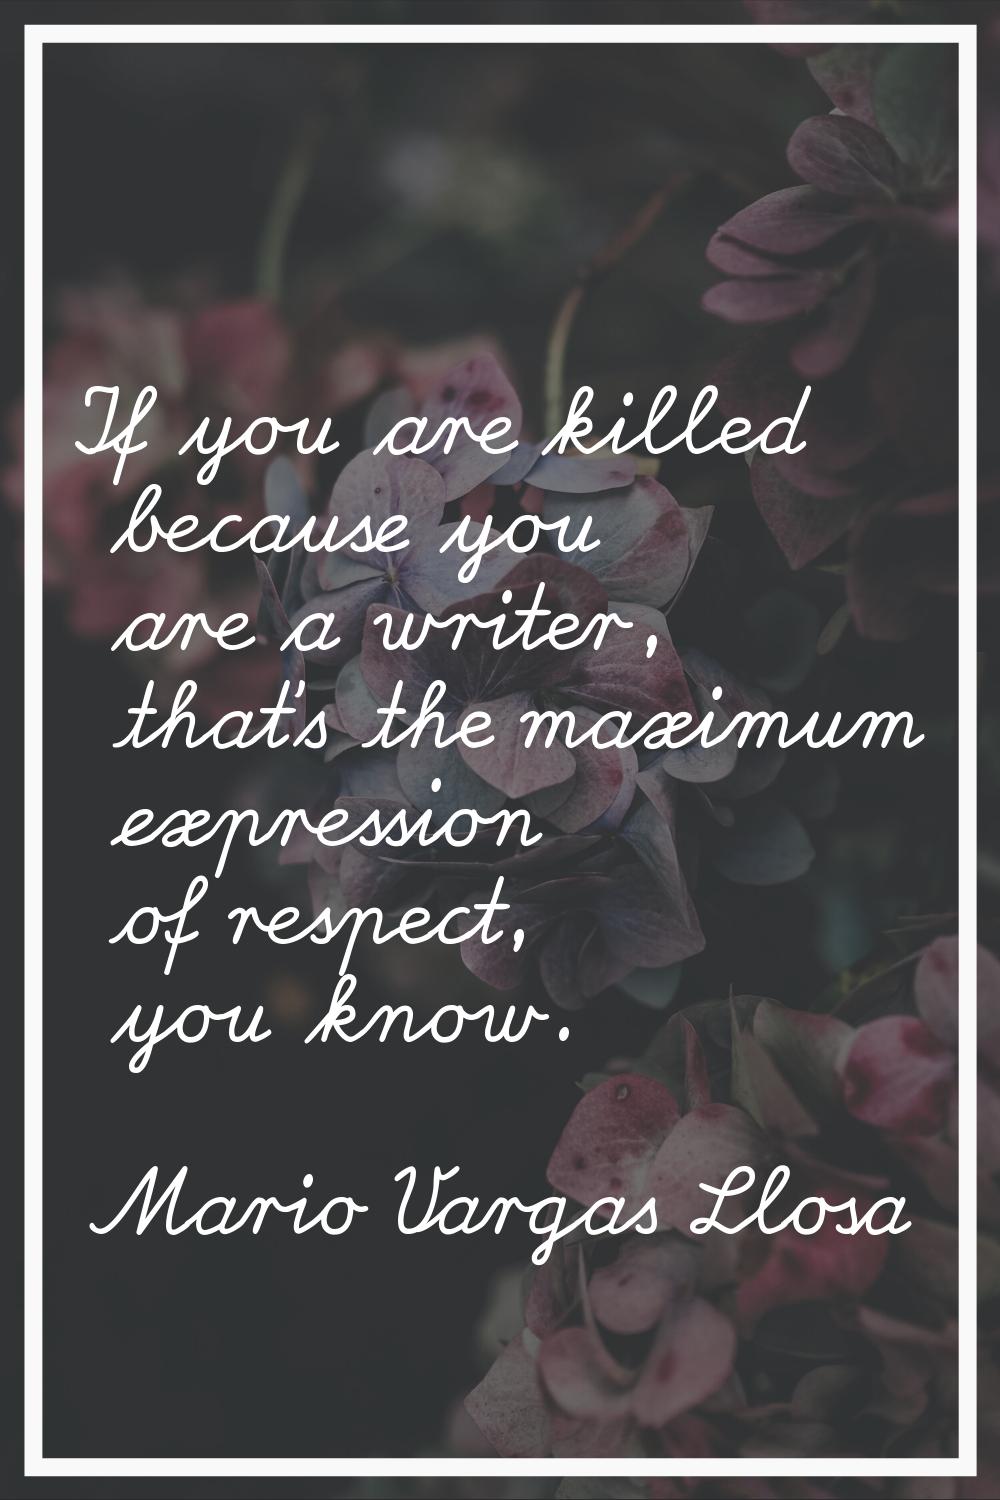 If you are killed because you are a writer, that's the maximum expression of respect, you know.